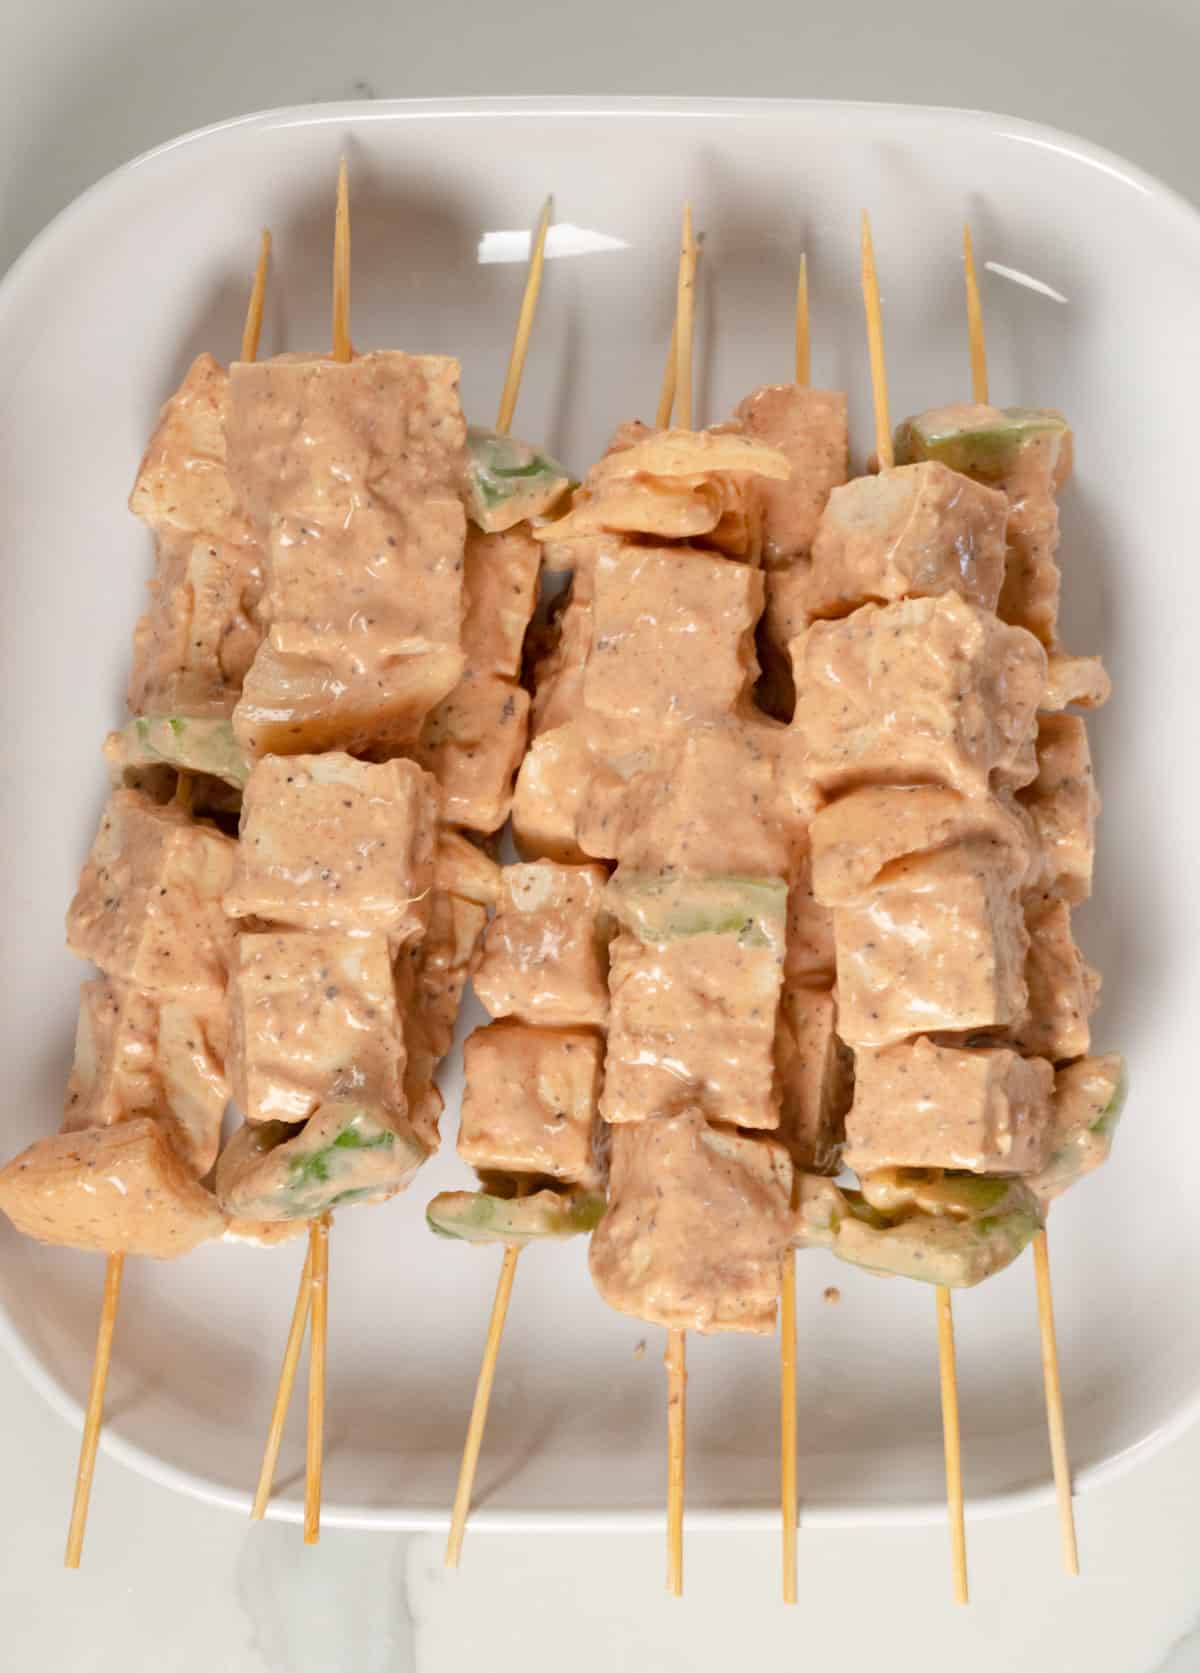 uncooked tofu skewers in a white square plate